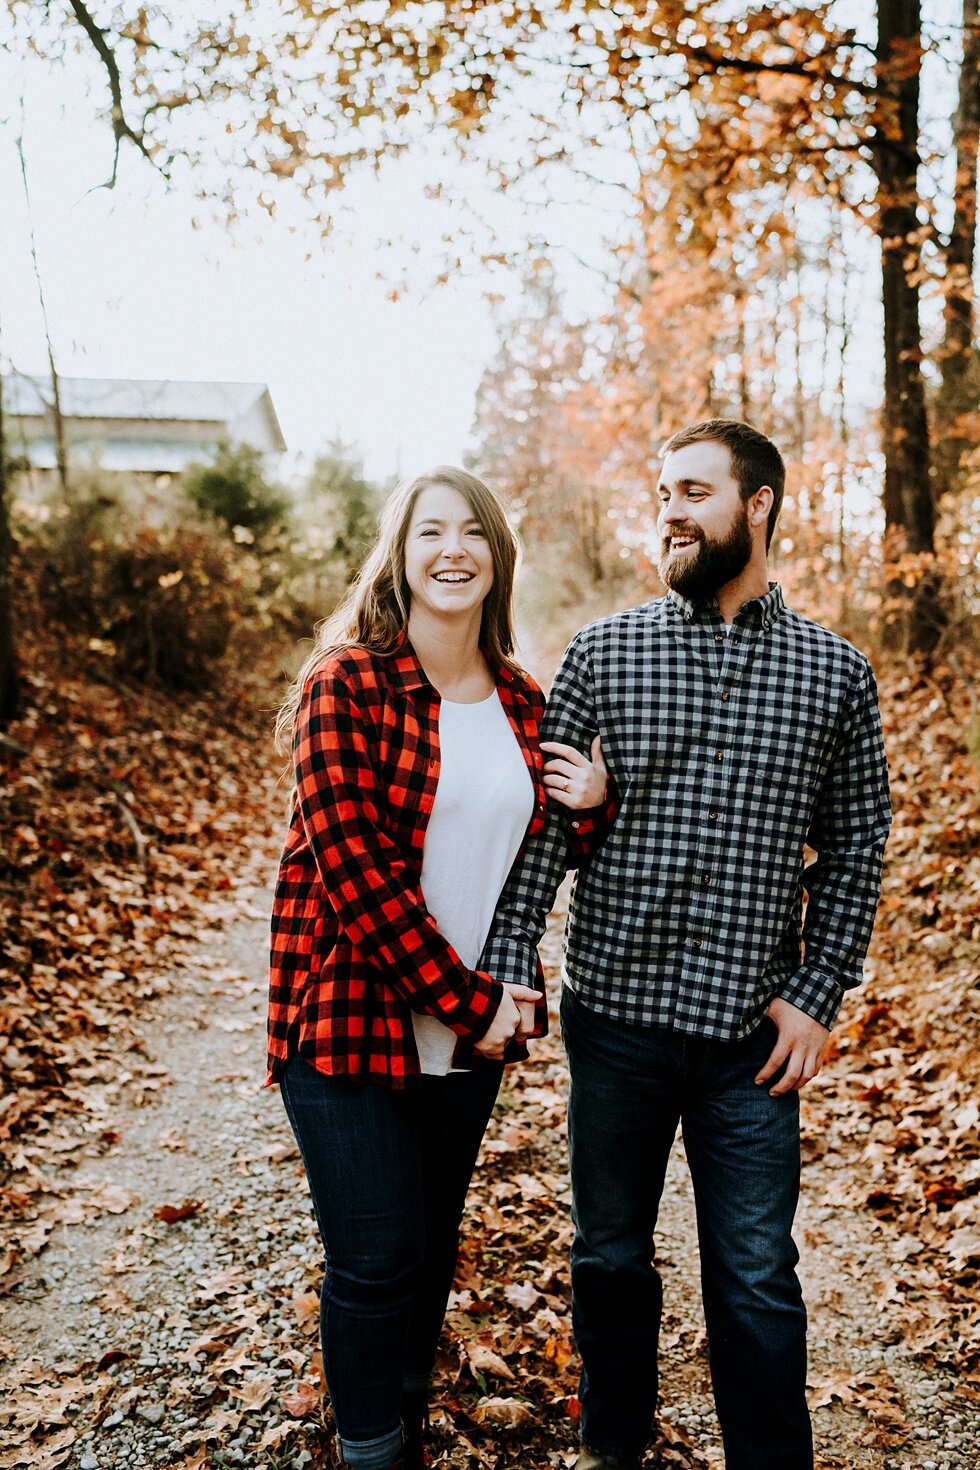  Nothing but smiles from these two as they fell more and more in love during this engagement session! #engagementgoals #engagementphotographer #engaged #outdoorengagement #kentuckyphotographer #indianaphotographer #louisvillephotographer #engagementp